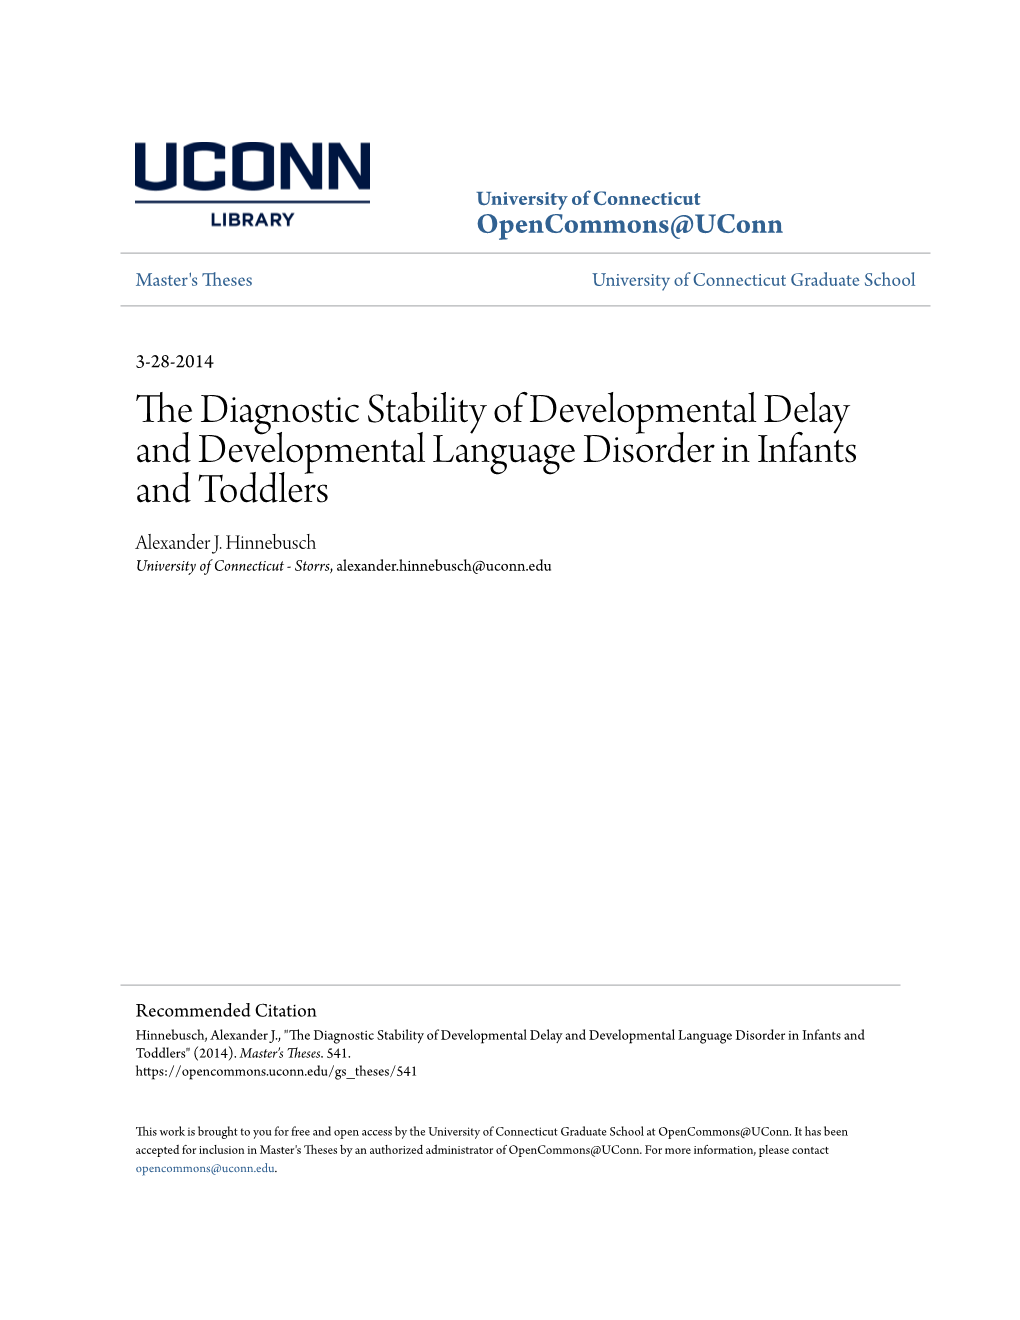 The Diagnostic Stability of Developmental Delay and Developmental Language Disorder in Infants and Toddlers Alexander J